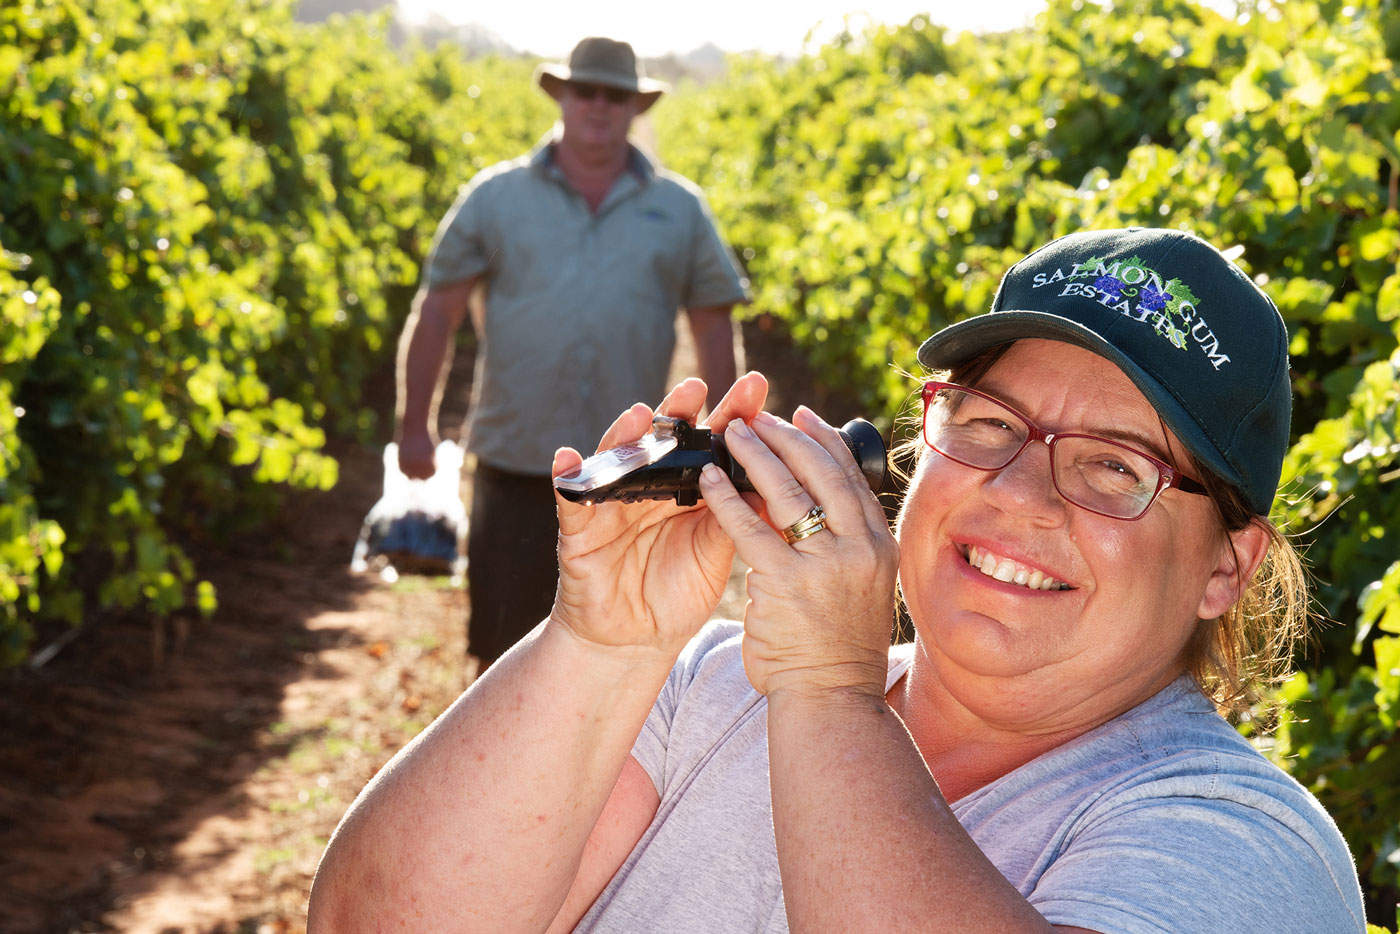 Jacque Schulz testing the quality of their riverland vineyard grapes